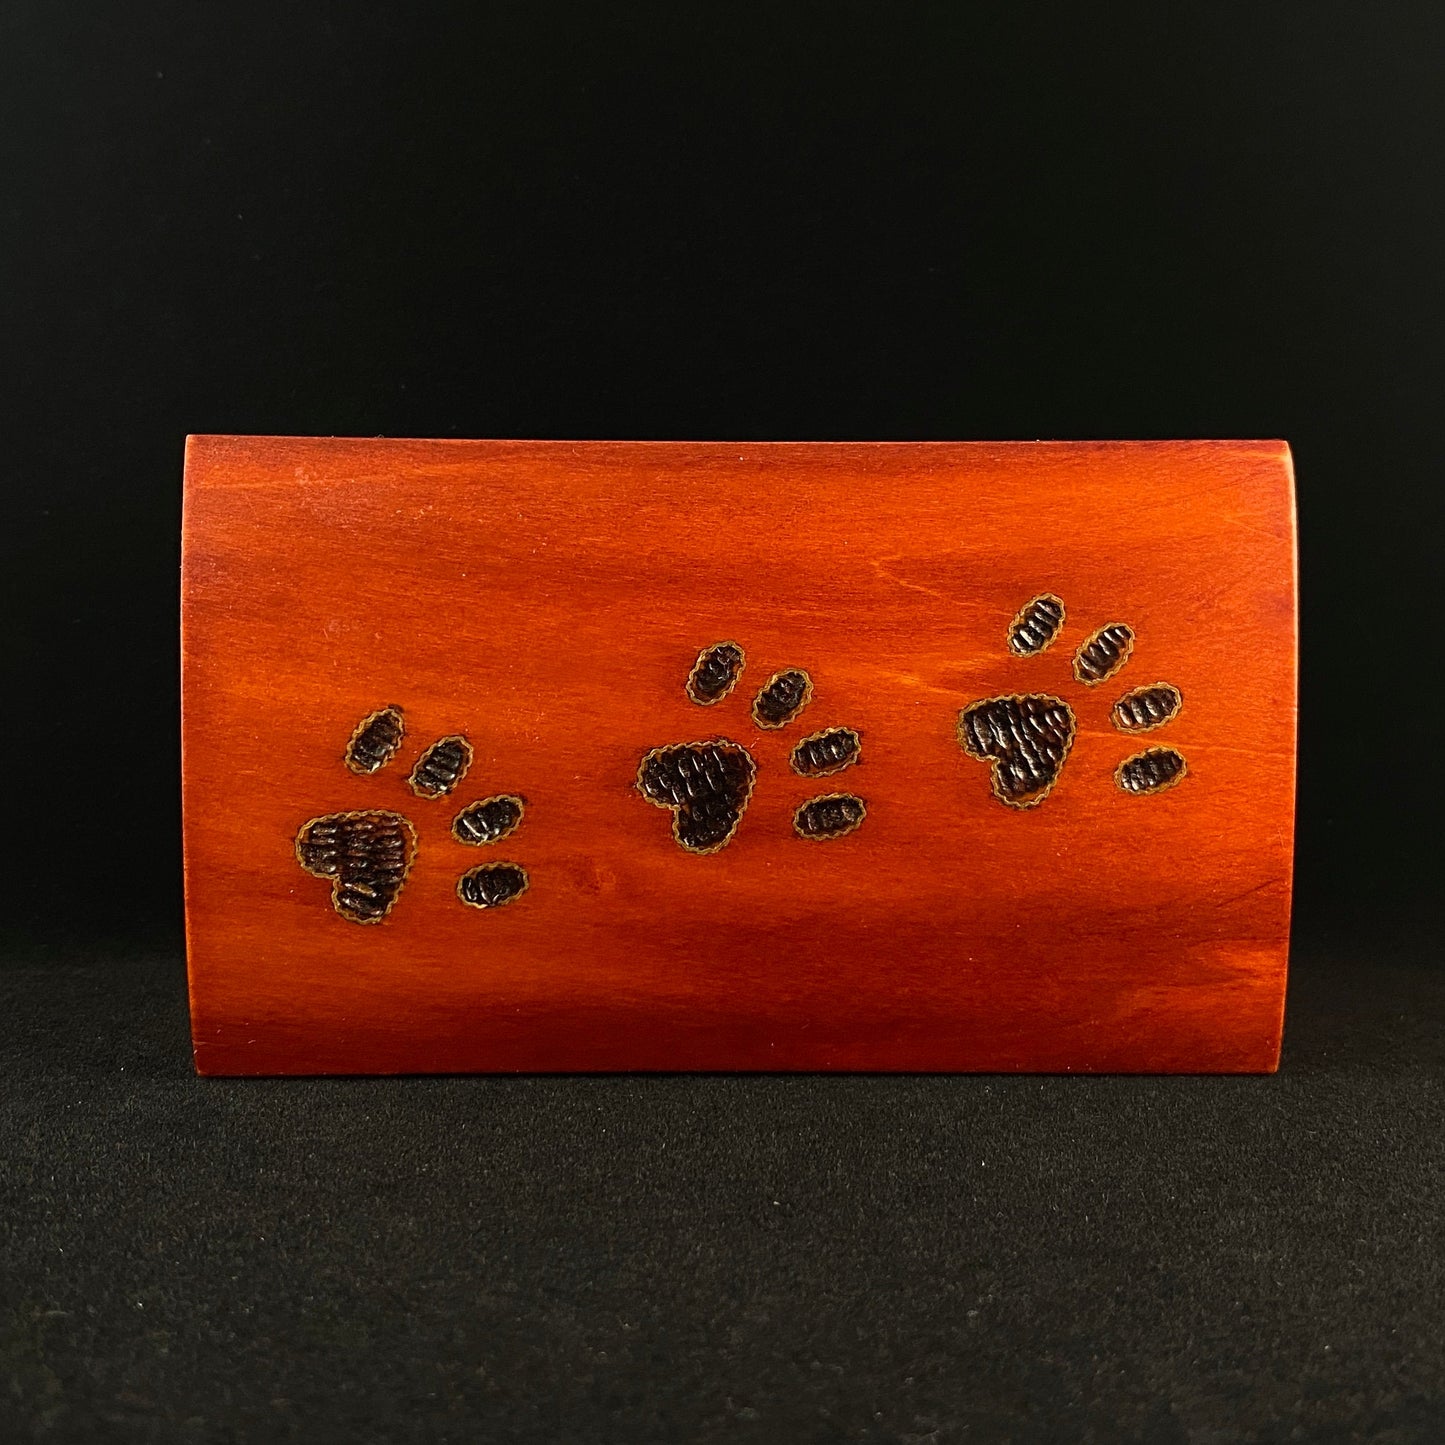 Small Paw Prints With Gold Outline, Handmade Hinged Square Wooden Treasure Box